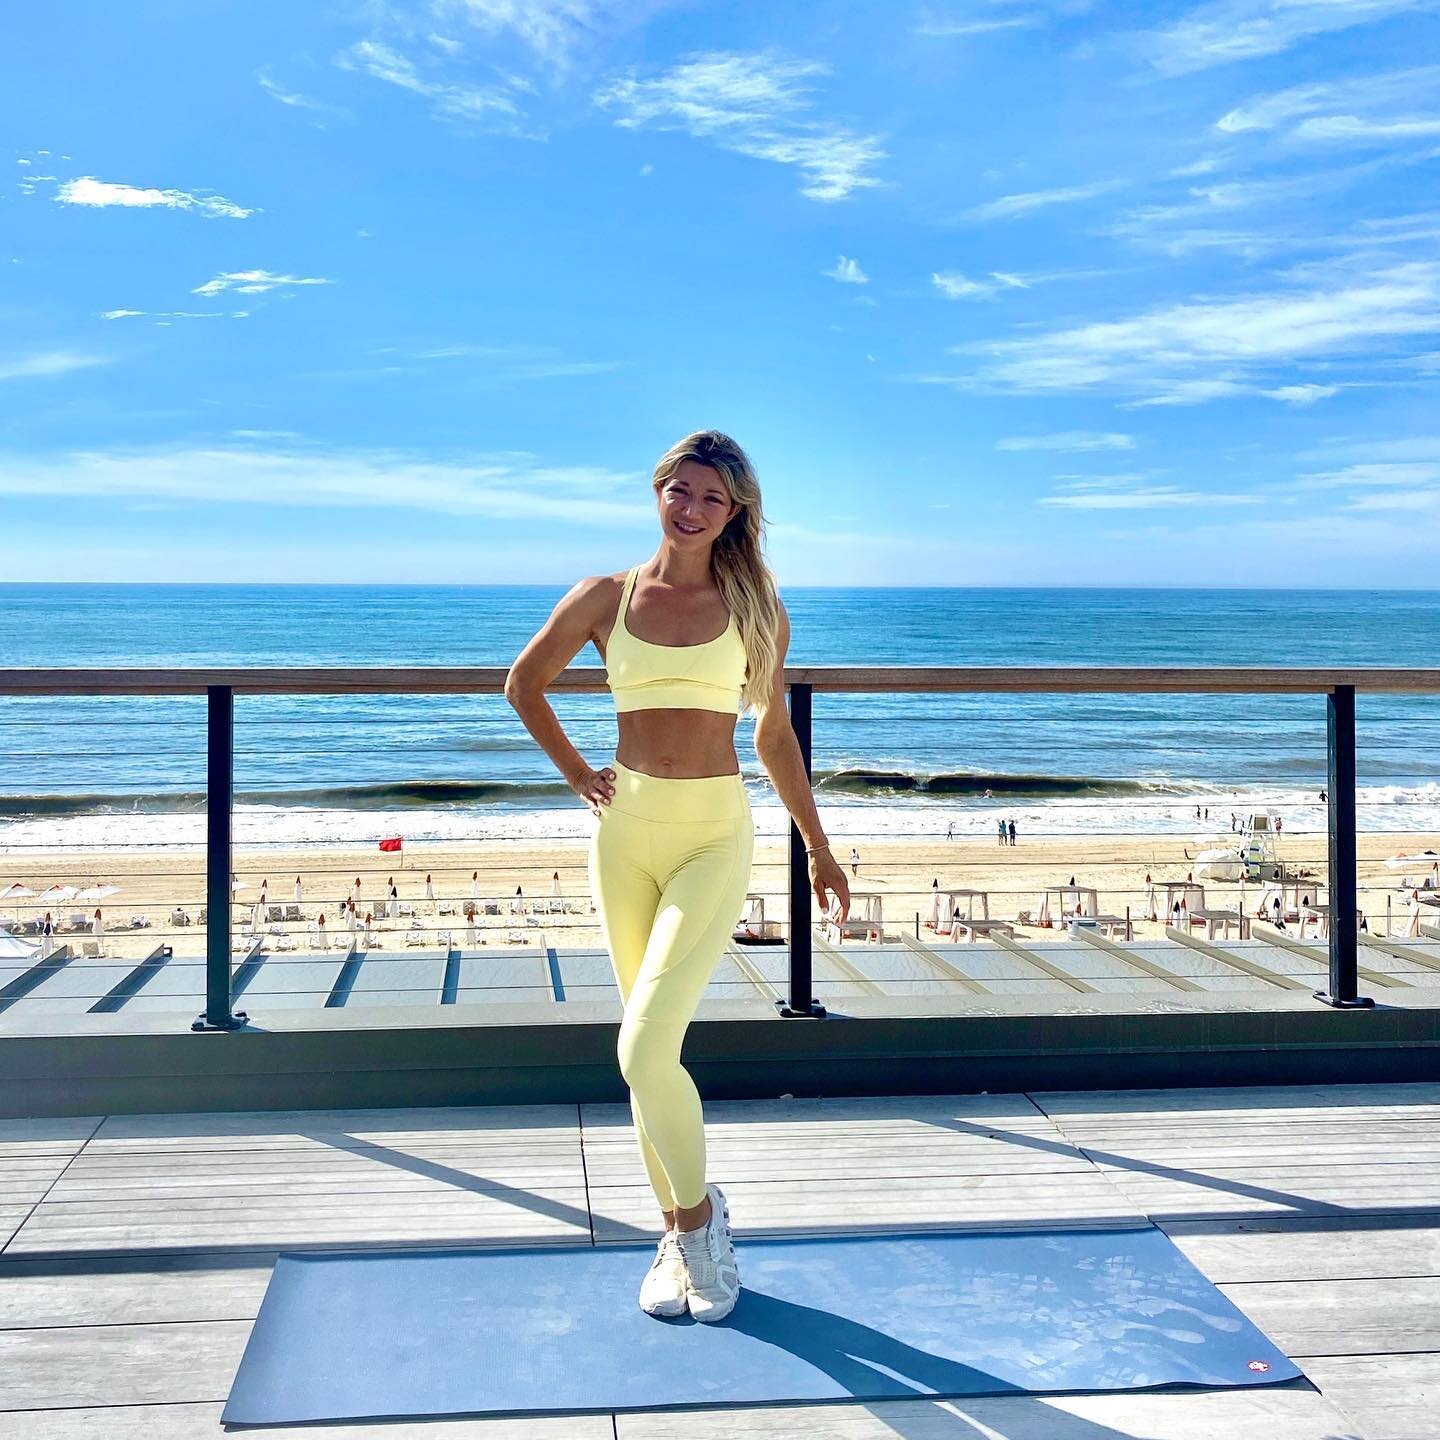 Get Ready to Xcell your BODY @gurneysresorts on Friday, September 3rd @8:30am
HIIT + Pilates + Stretch
Science-backed optimum performance + recovery 
Keep your calorie burn 🔥 high &amp; your cortisol low 

Healthy post workout snacks provided by @da